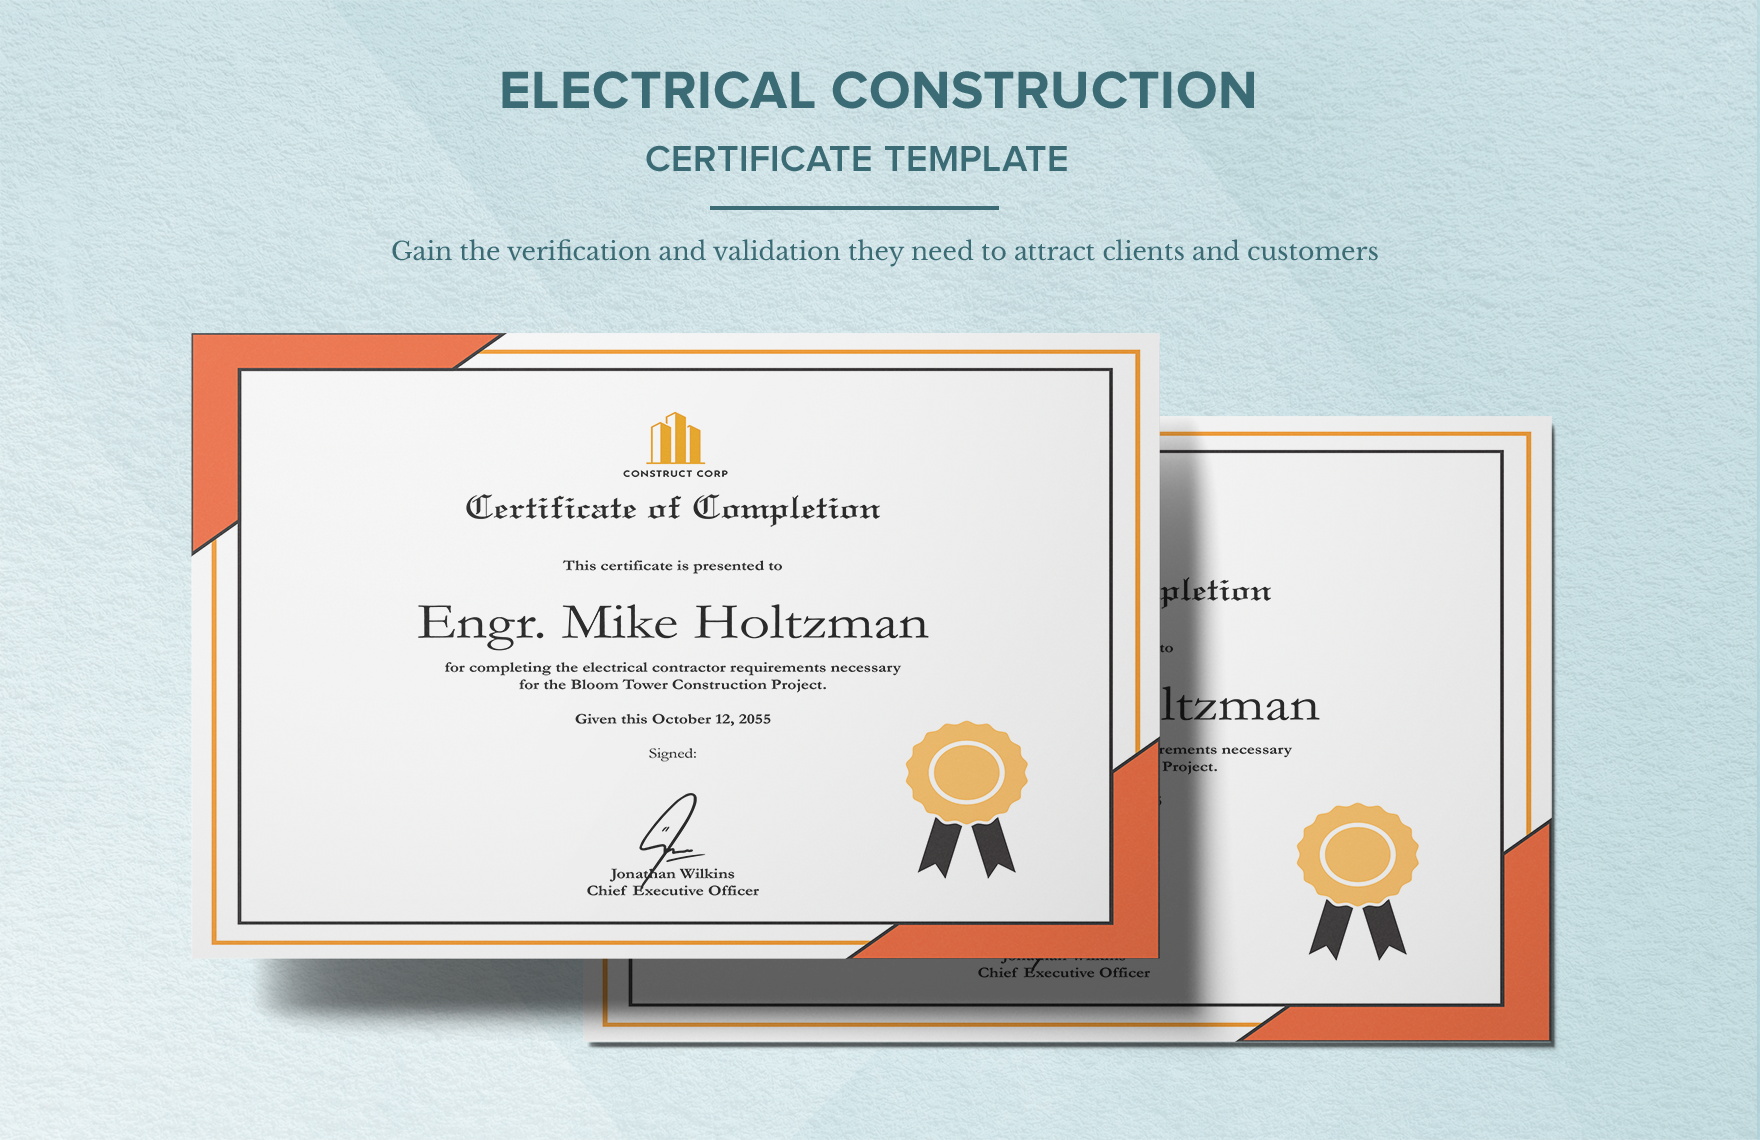 Electrical Construction Certificate Template